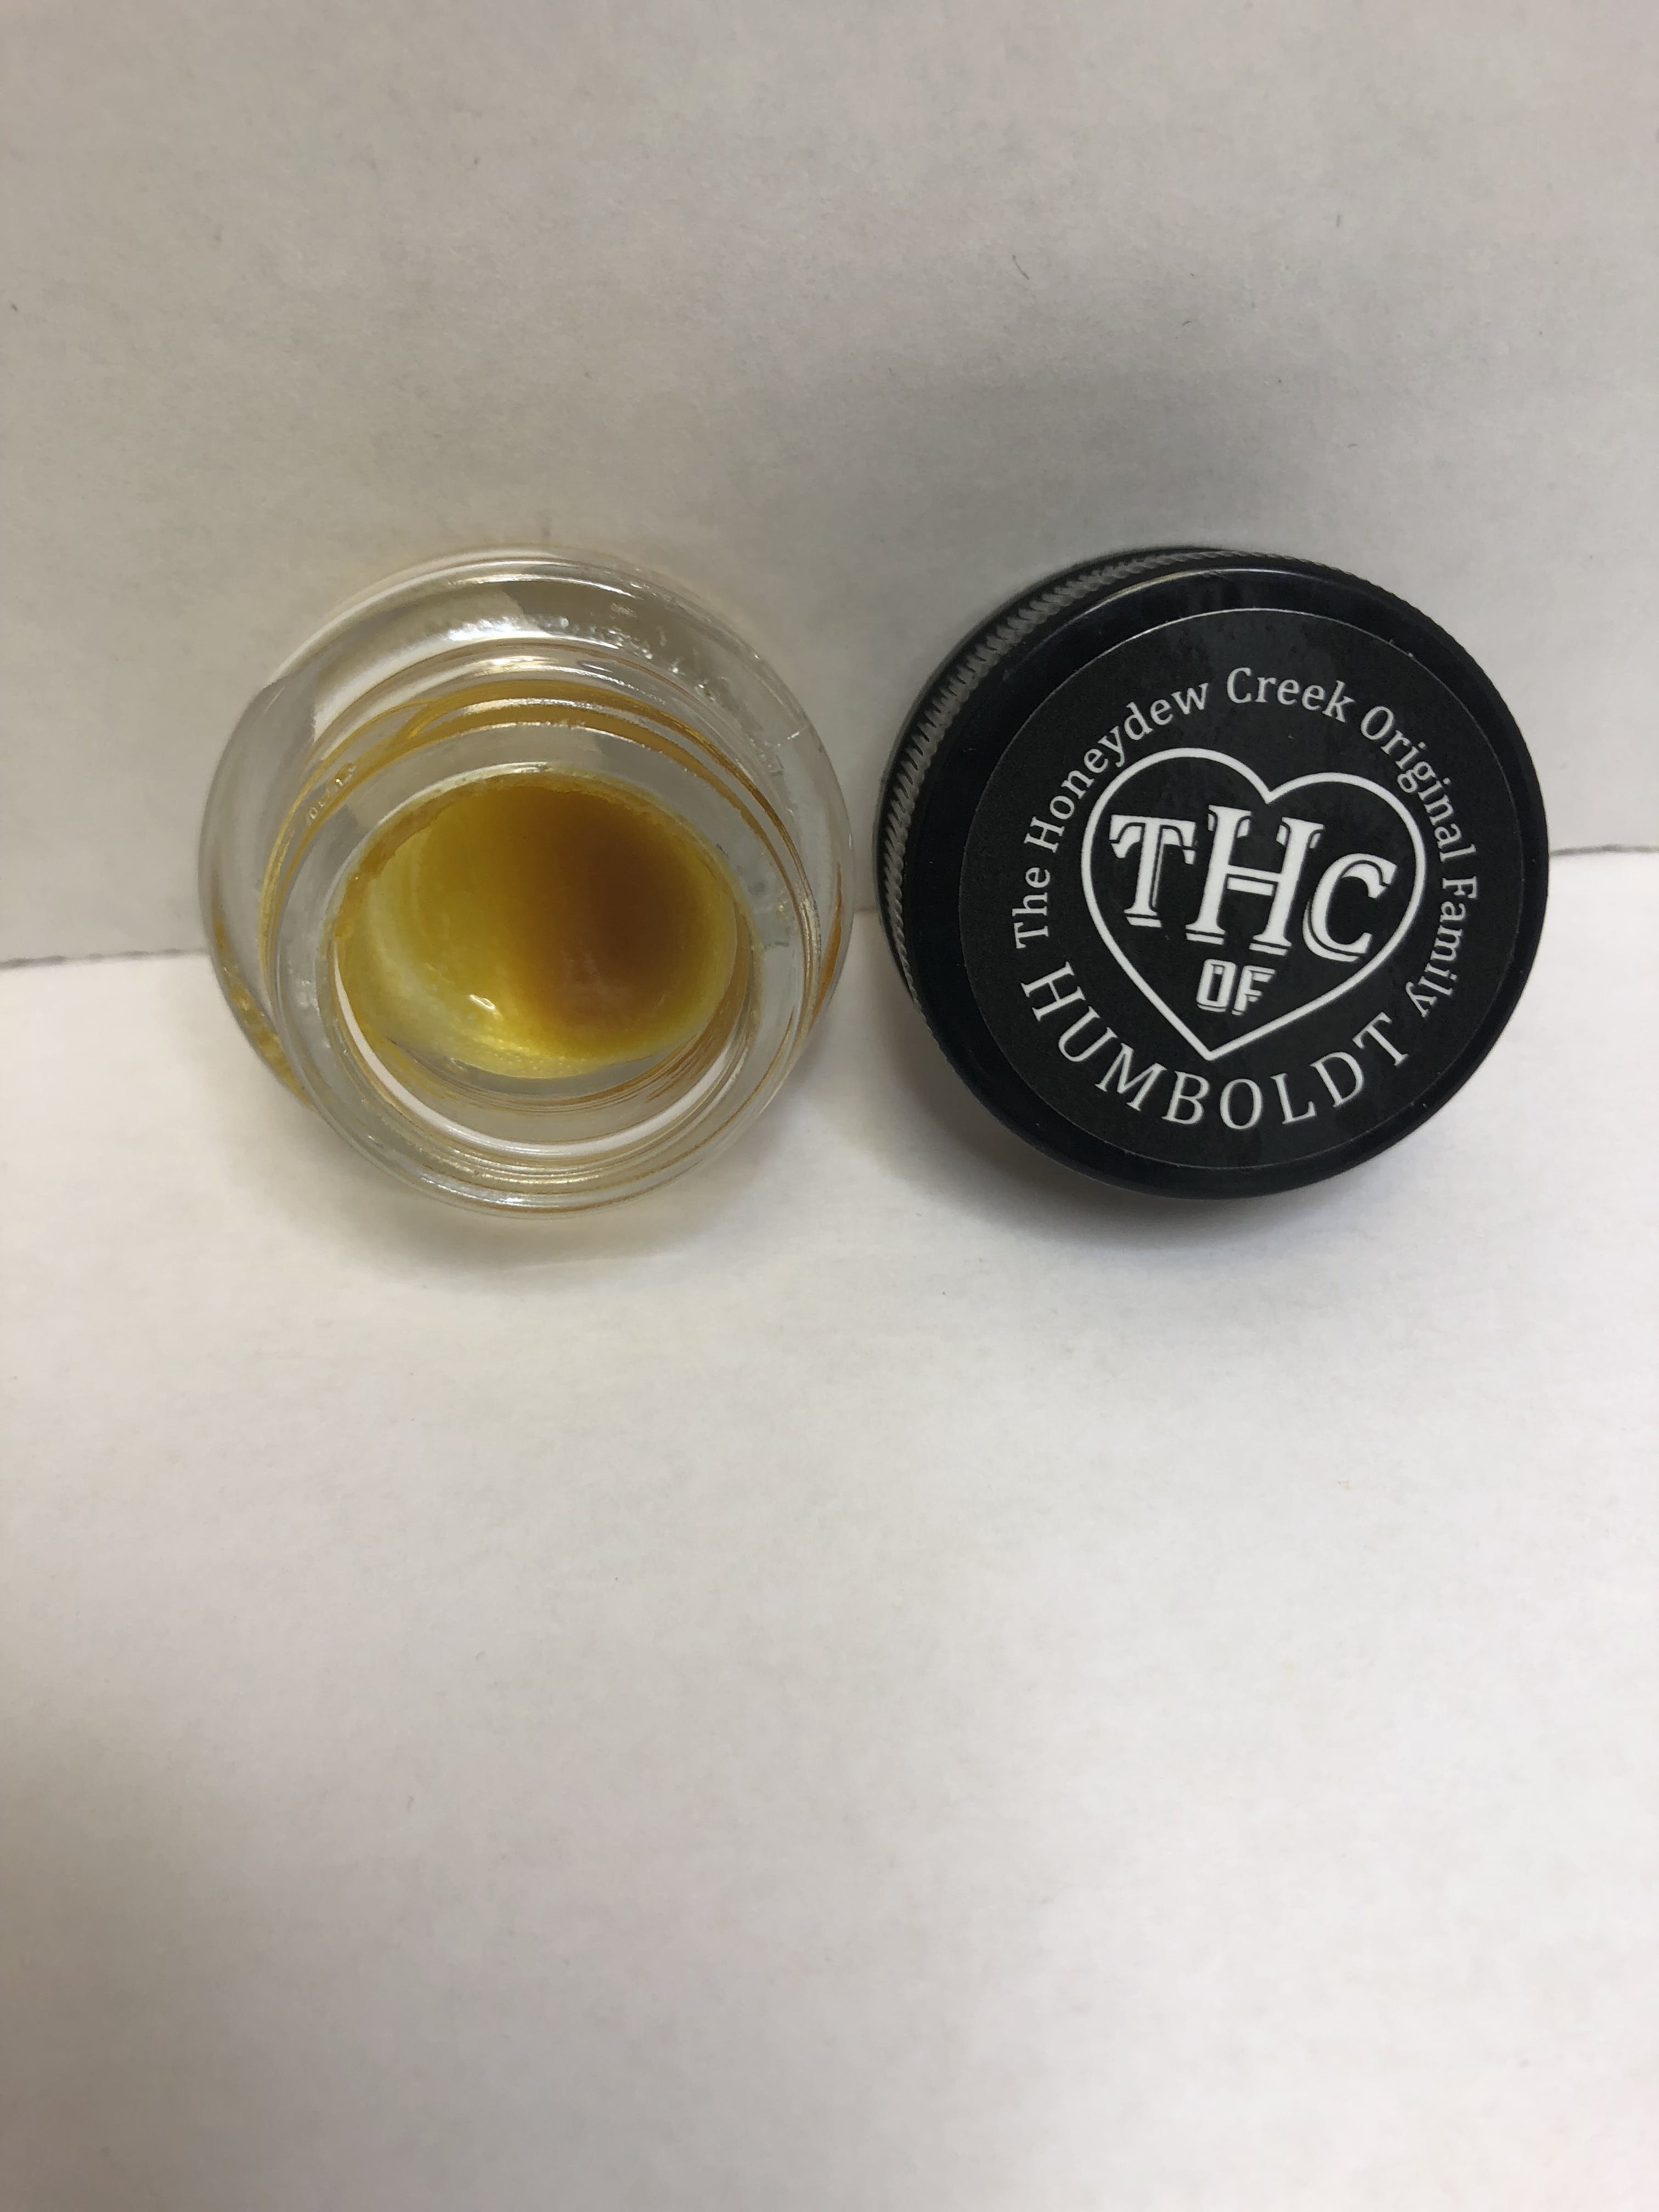 concentrate-black-jack-sauce-by-the-honeydew-creek-original-family